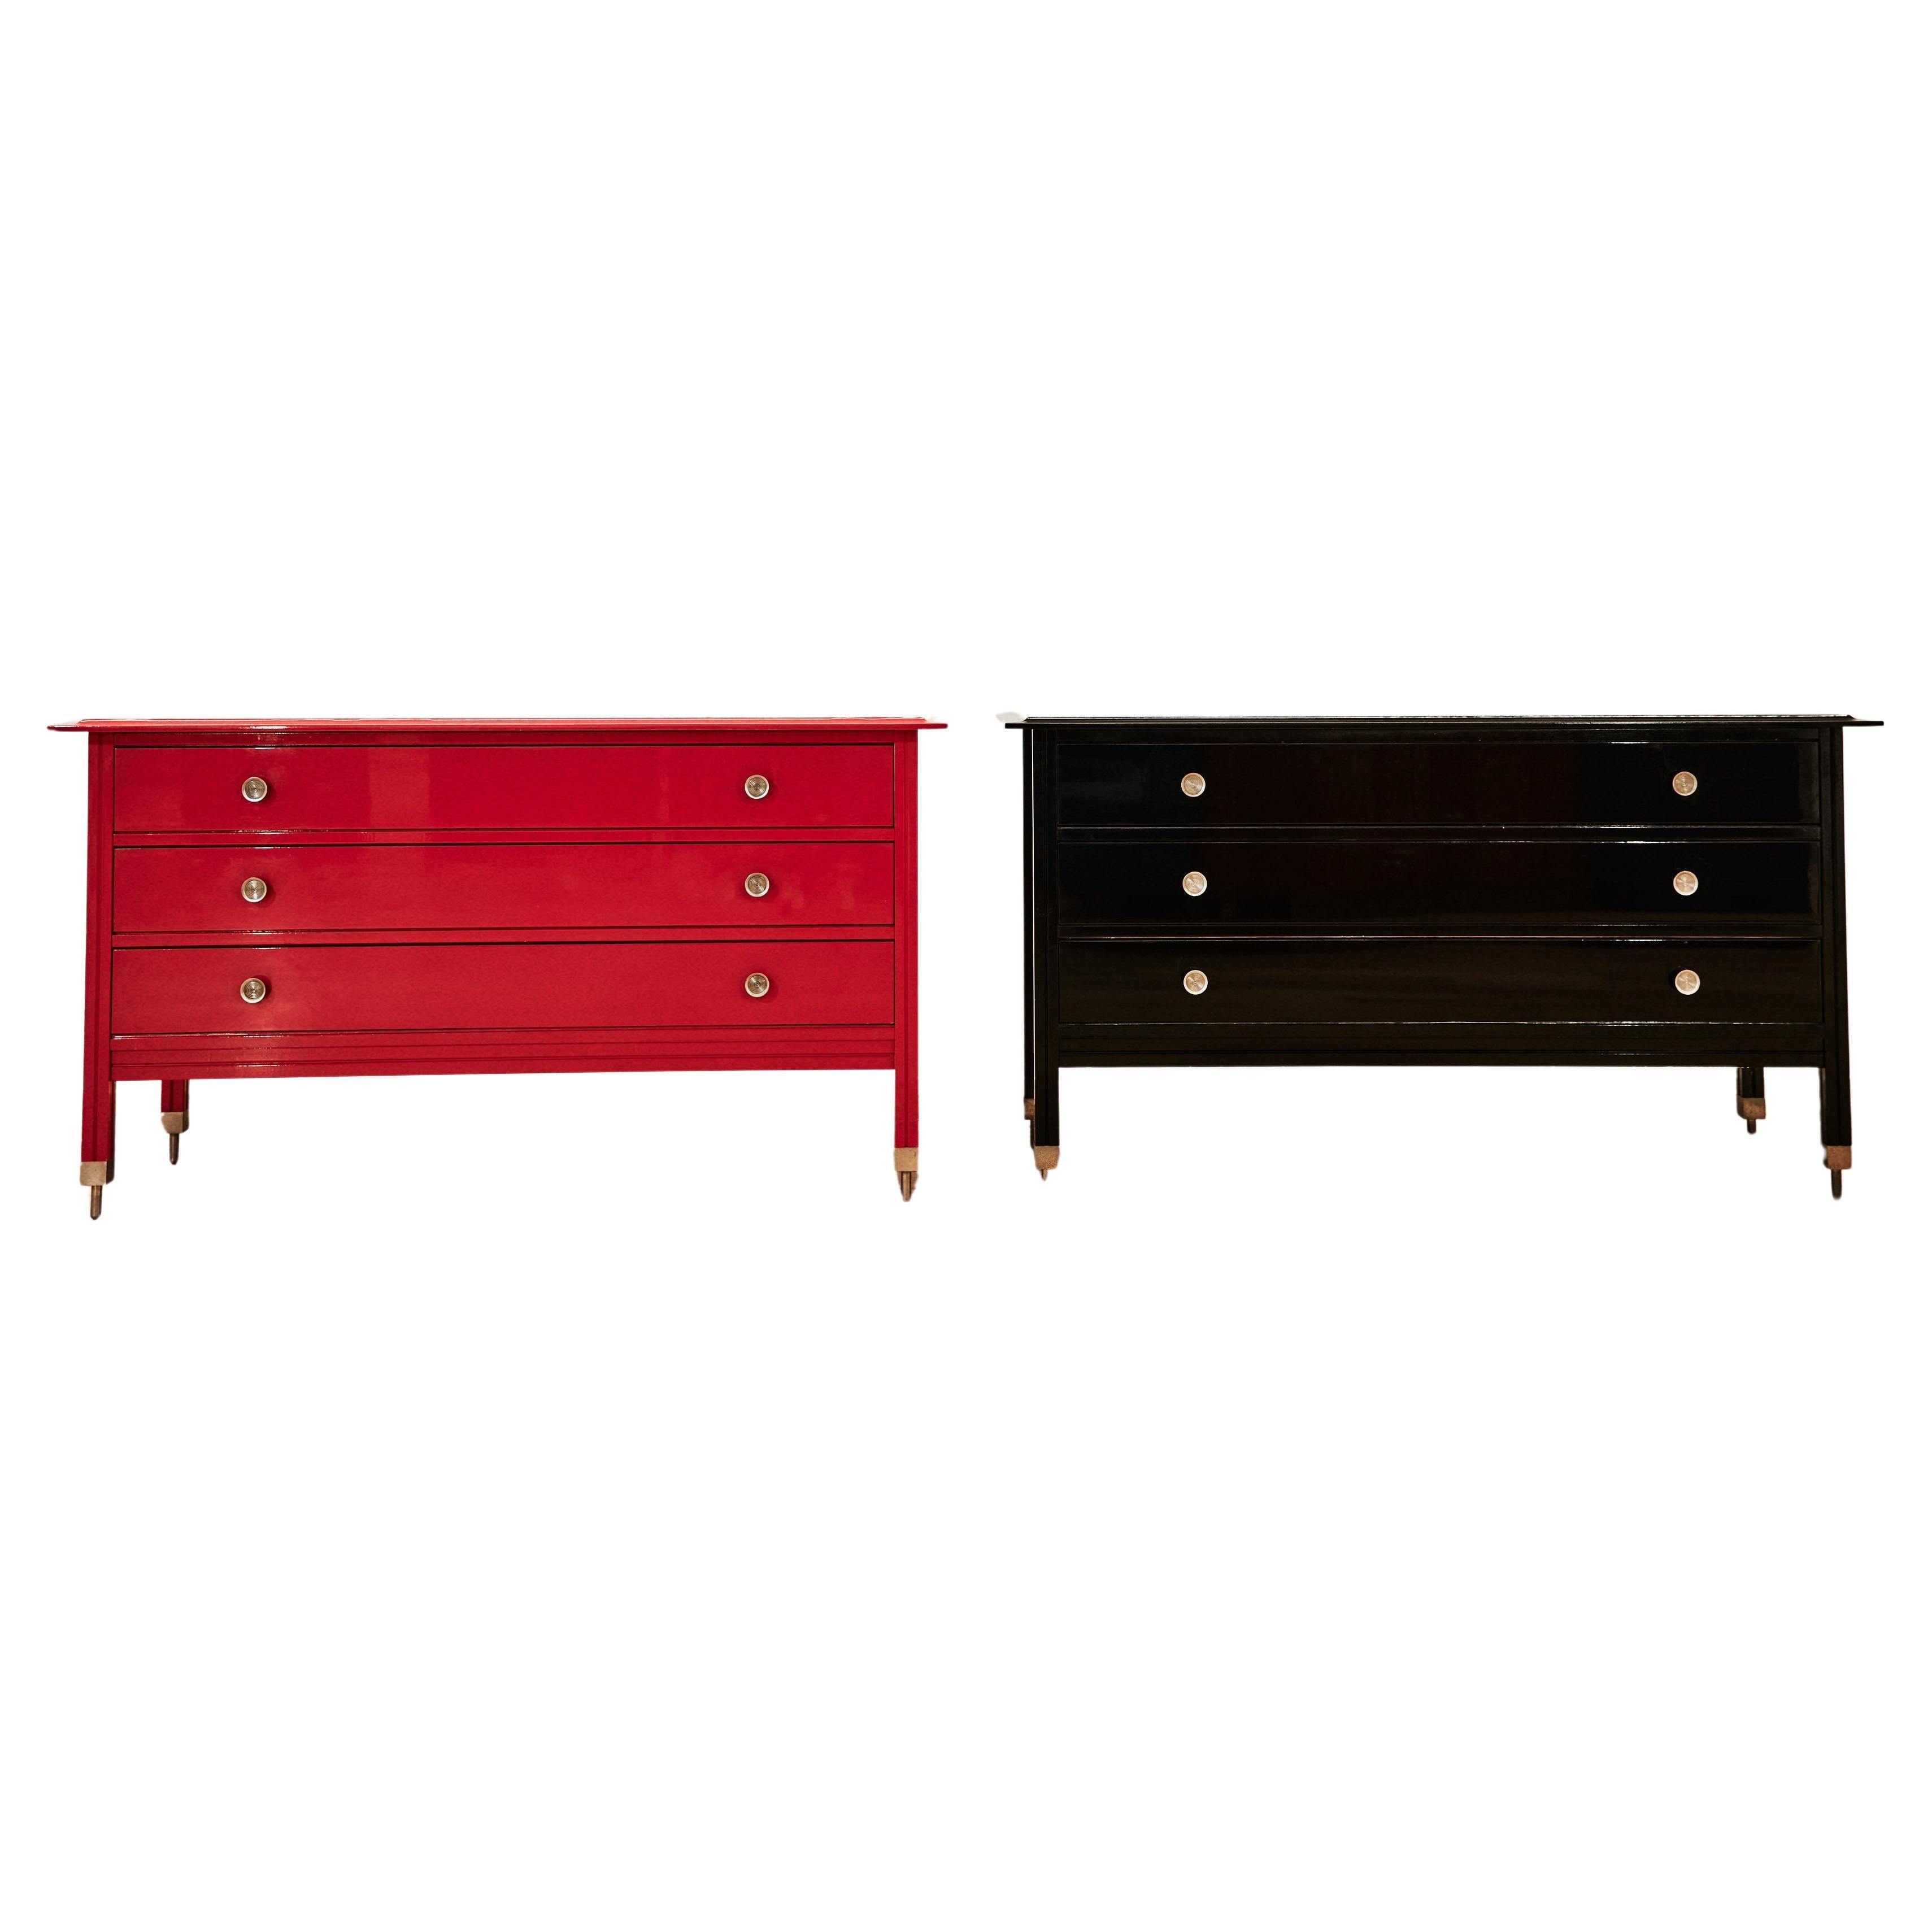 Pair of lacquered wood chests of drawers by carlo De Carli for Sormani